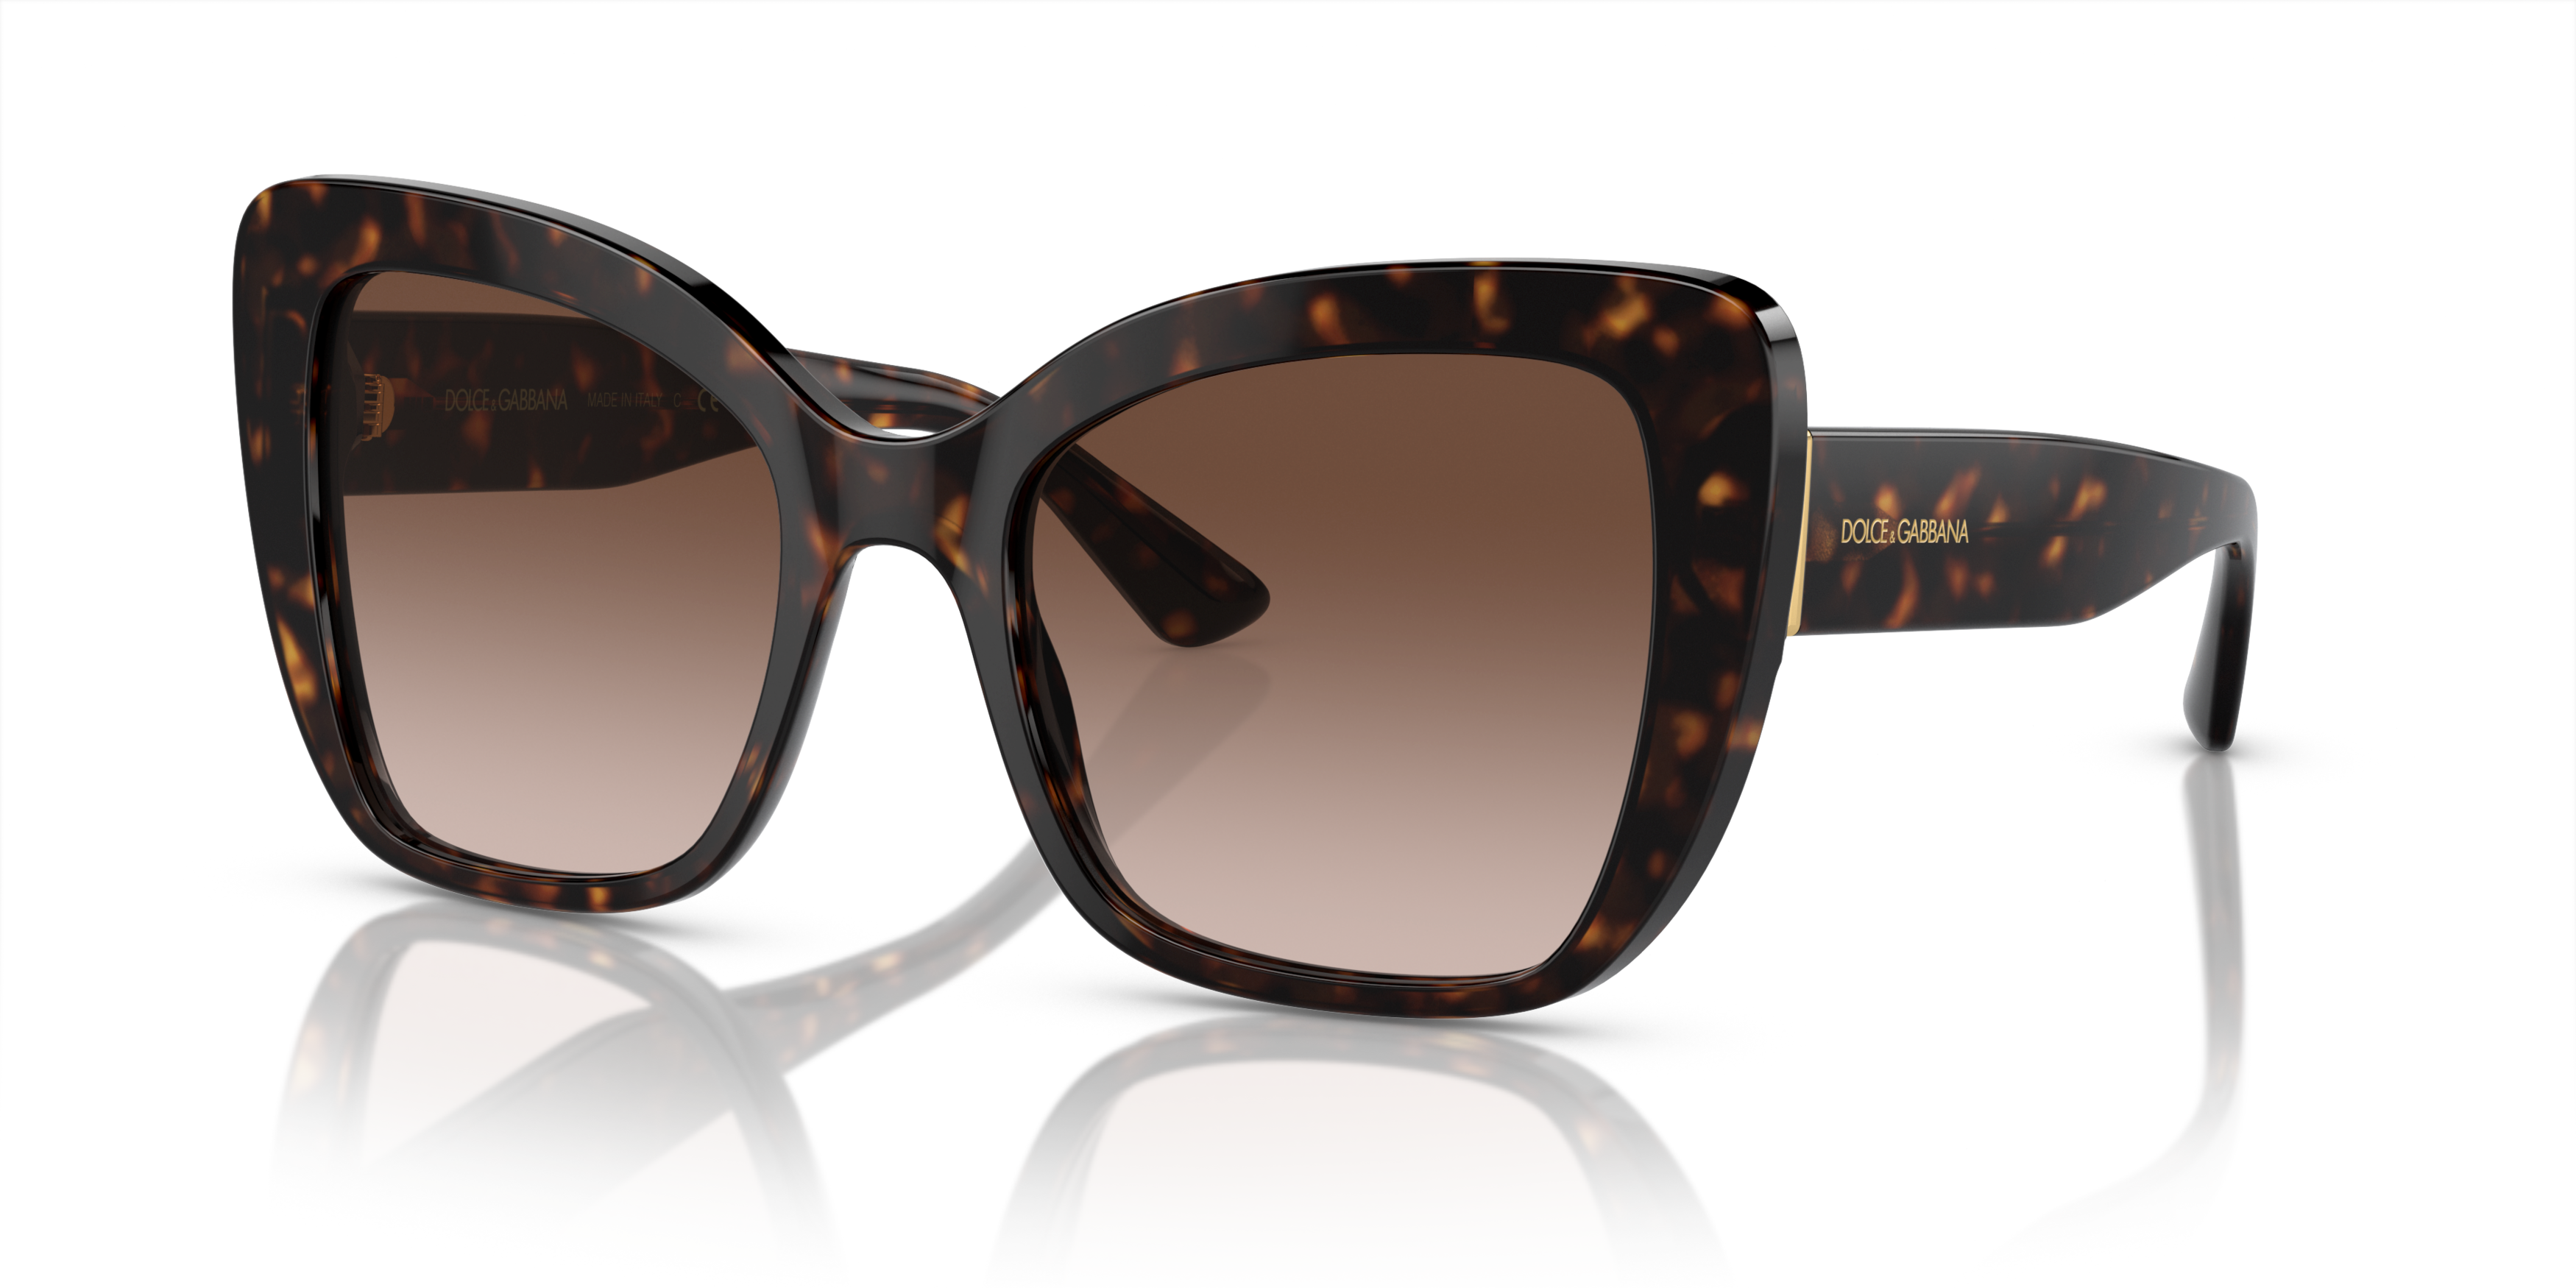 [products.image.angle_left01] Dolce and Gabbana Print Family 0DG4348 502/13